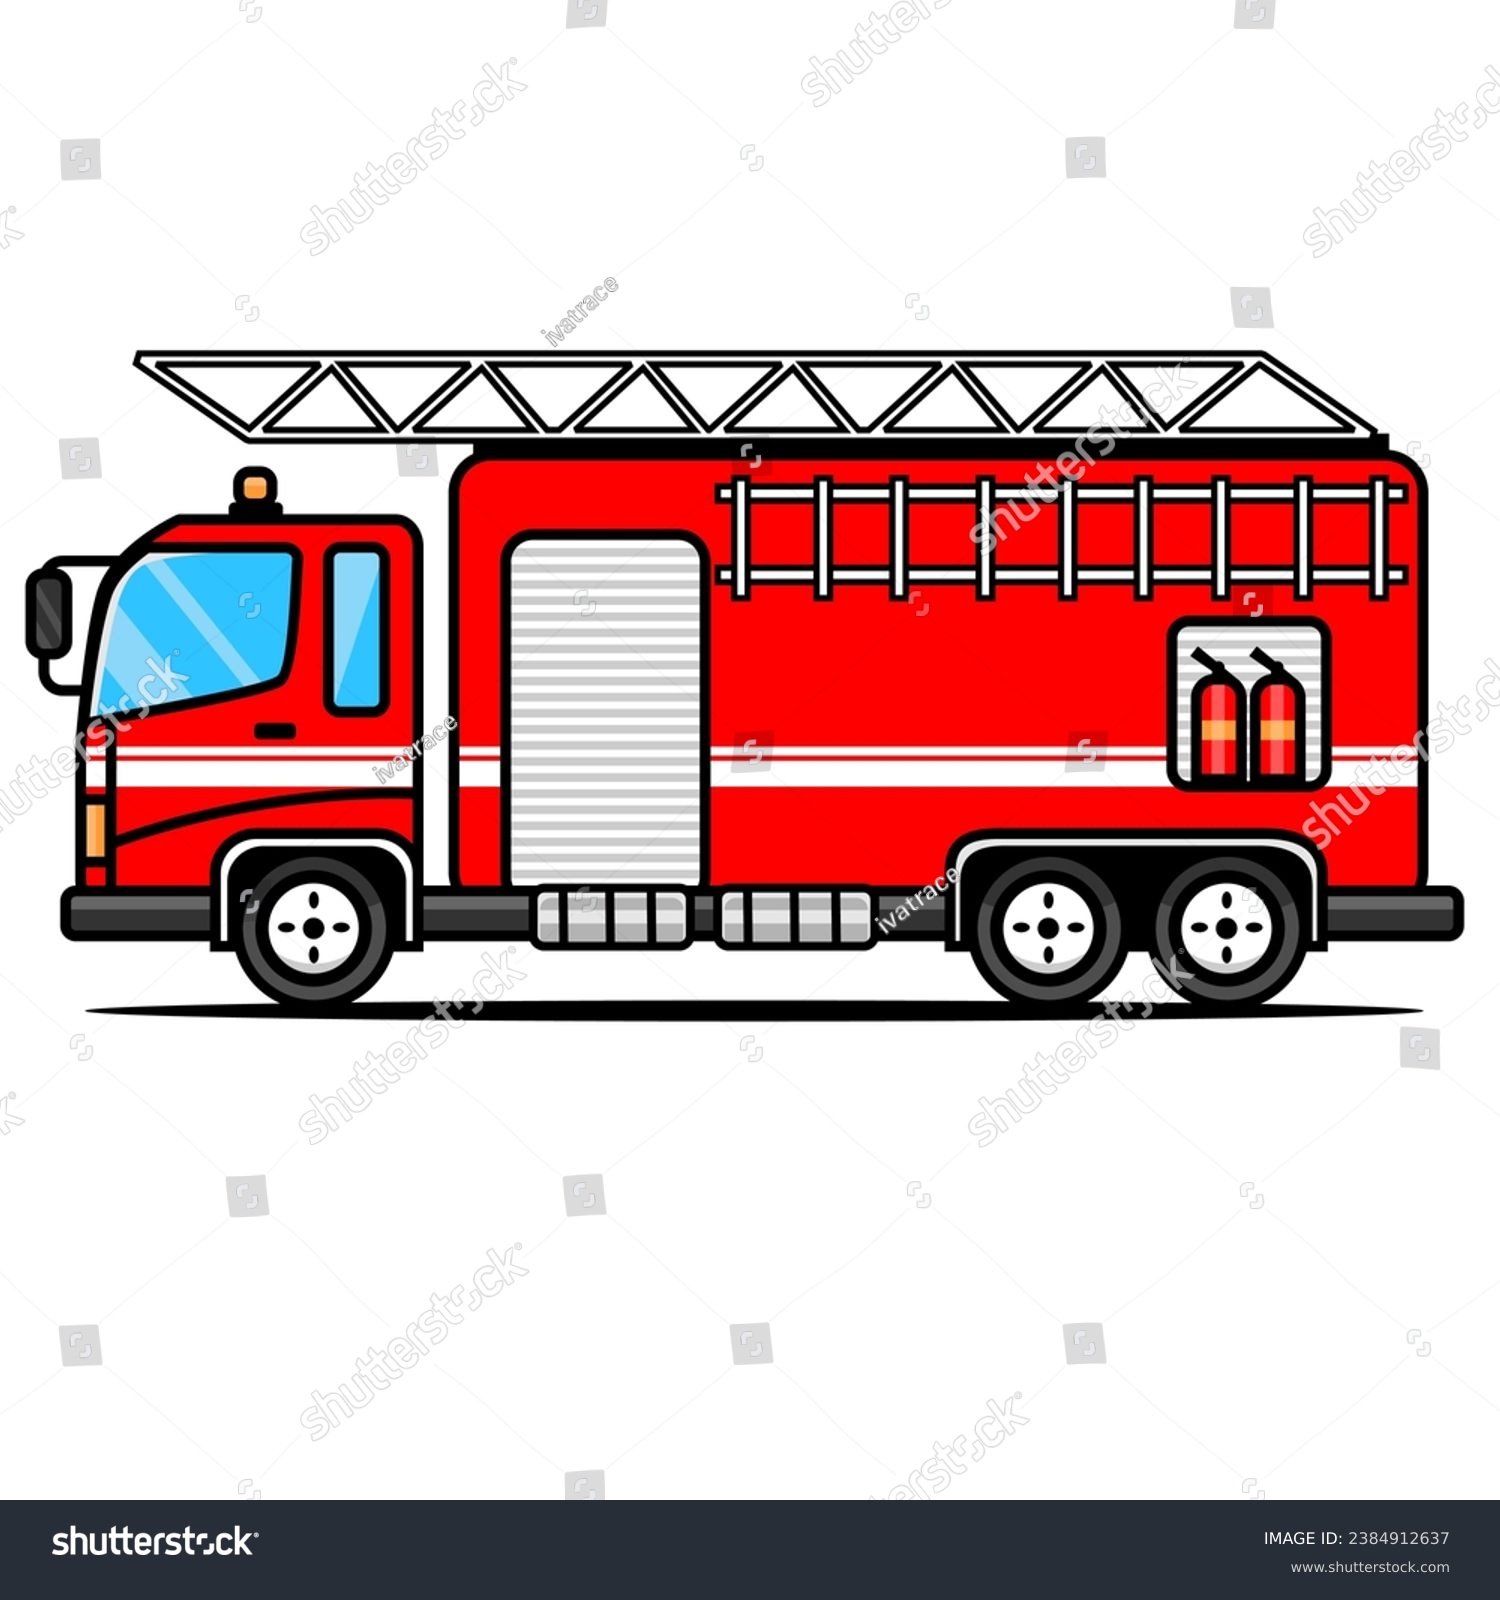 SVG of vector illustration of a red fire truck svg